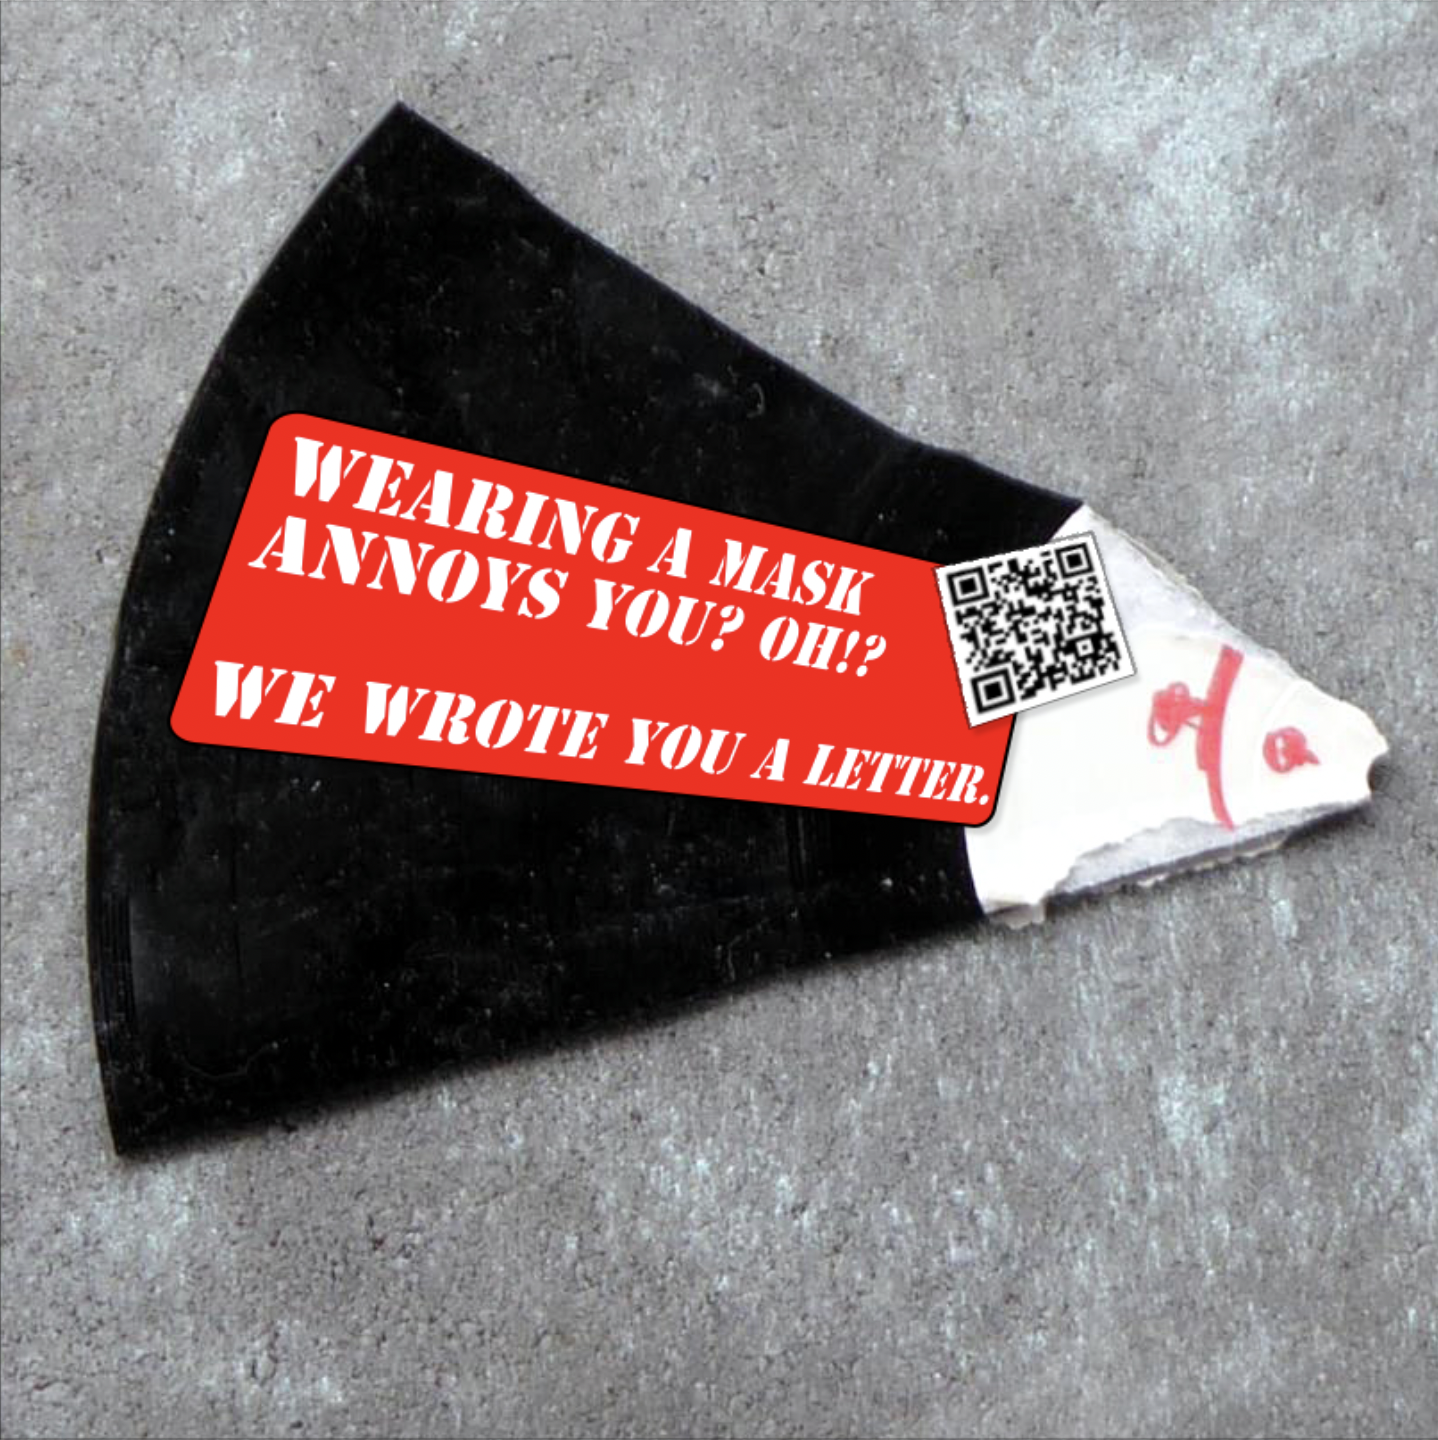 A shard of a record with a sticker on it that reads "Wearing a mask annoys you? Oh?! We wrote you a letter". Next to it there's a QR-code that leads to our zine: An Open Letter to our Comrades